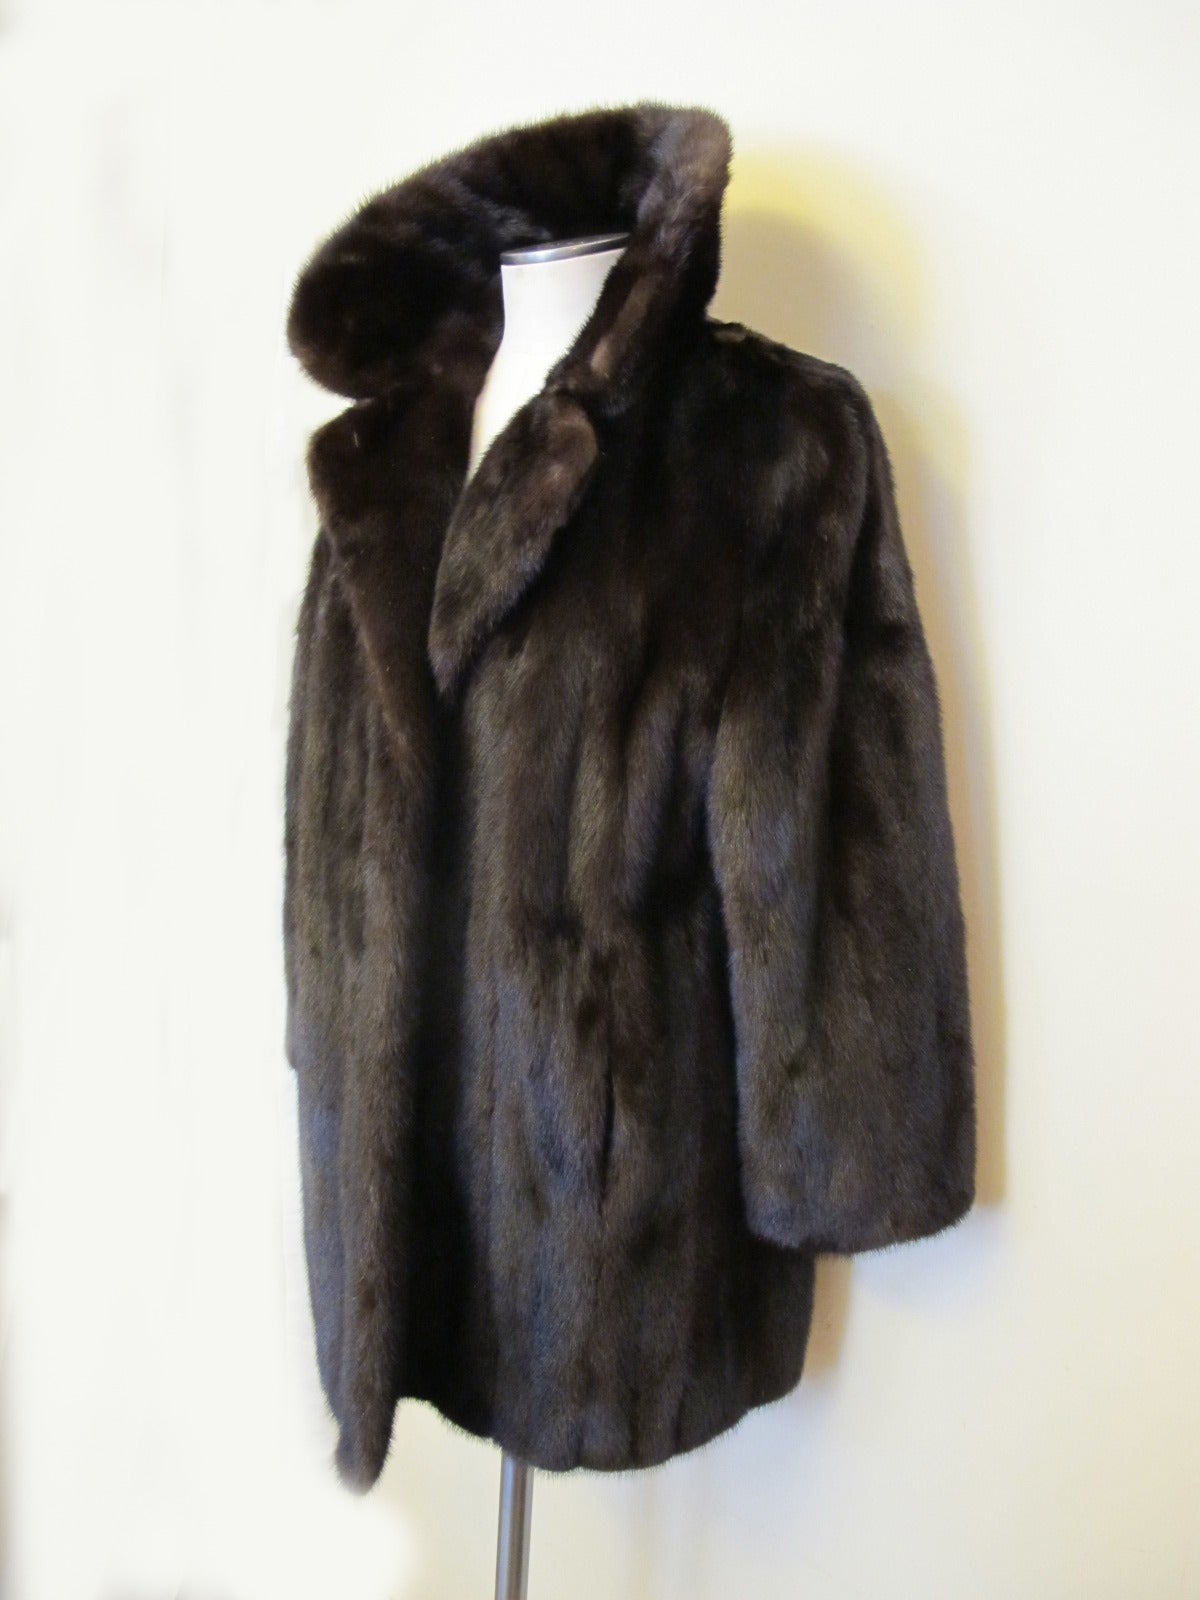 Ranch Mink 3/4 Coat In Excellent Condition For Sale In San Francisco, CA